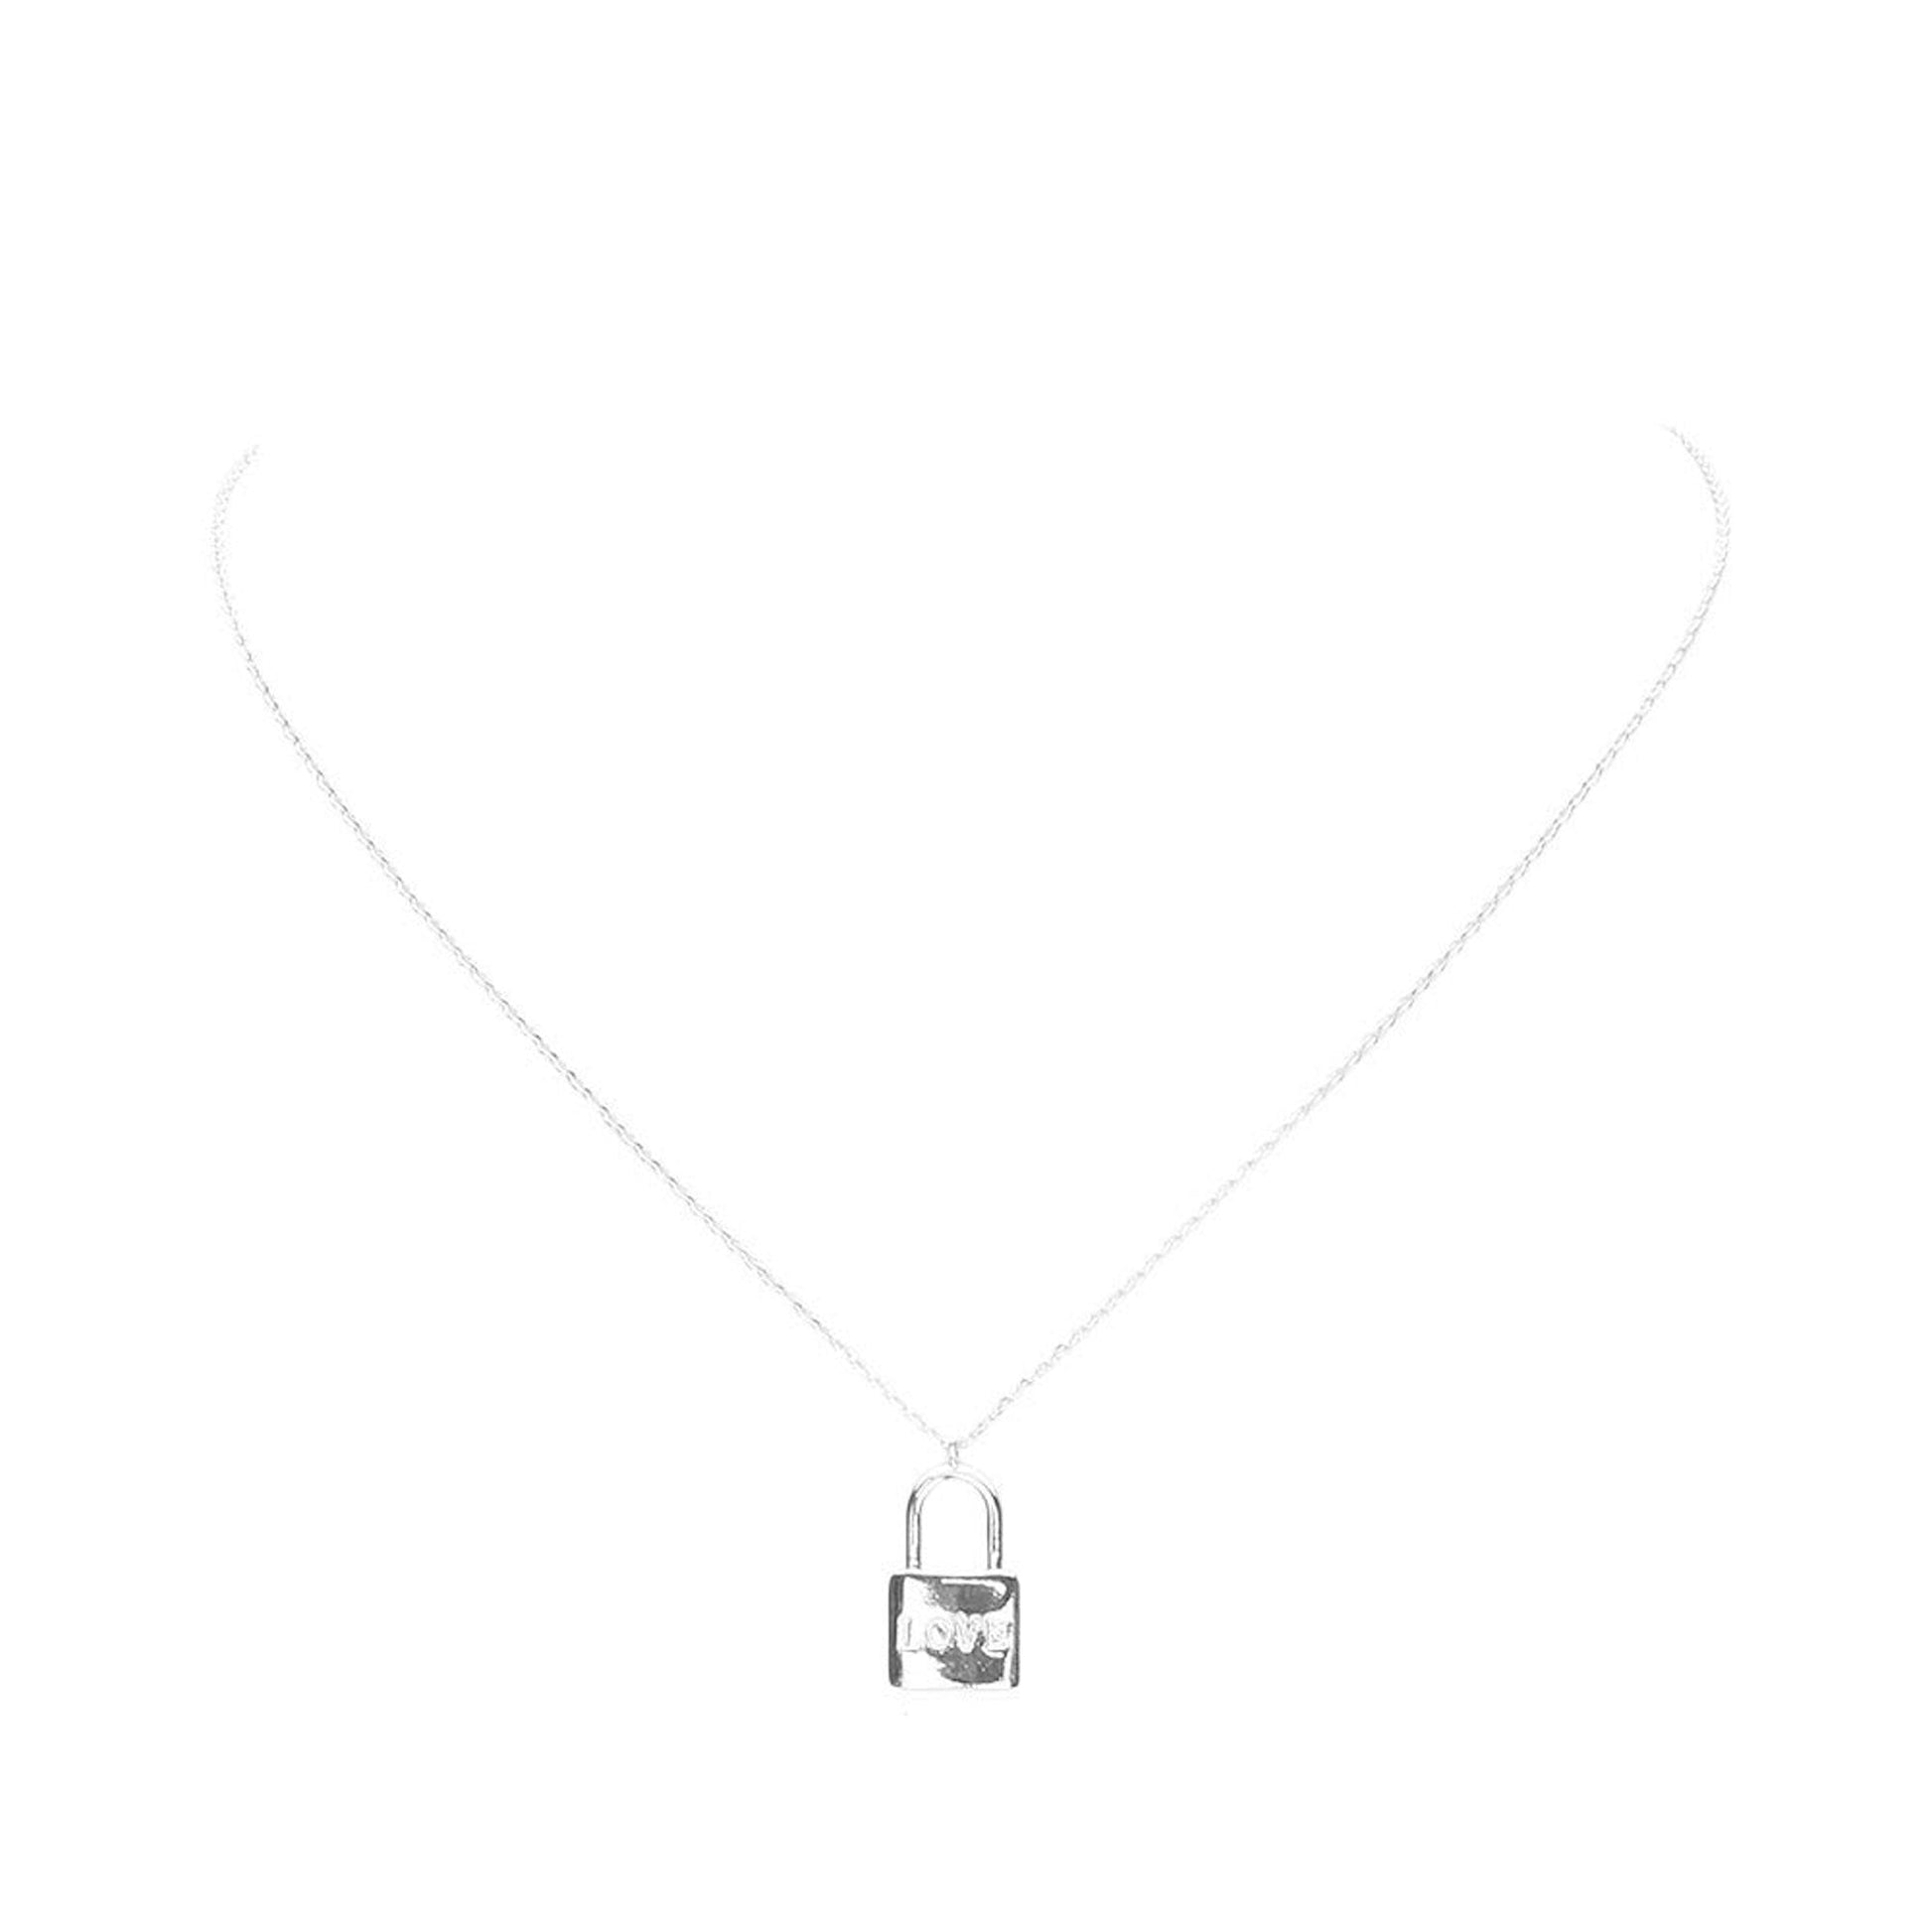 Rhodium Love White Gold Dipped Metal Lock Pendant Necklace, Get ready with these Pendant Necklace, put on a pop of color to complete your ensemble. Perfect for adding just the right amount of shimmer & shine and a touch of class to special events. Perfect Birthday Gift, Valentine's Gift, Anniversary Gift, Mother's Day Gift.